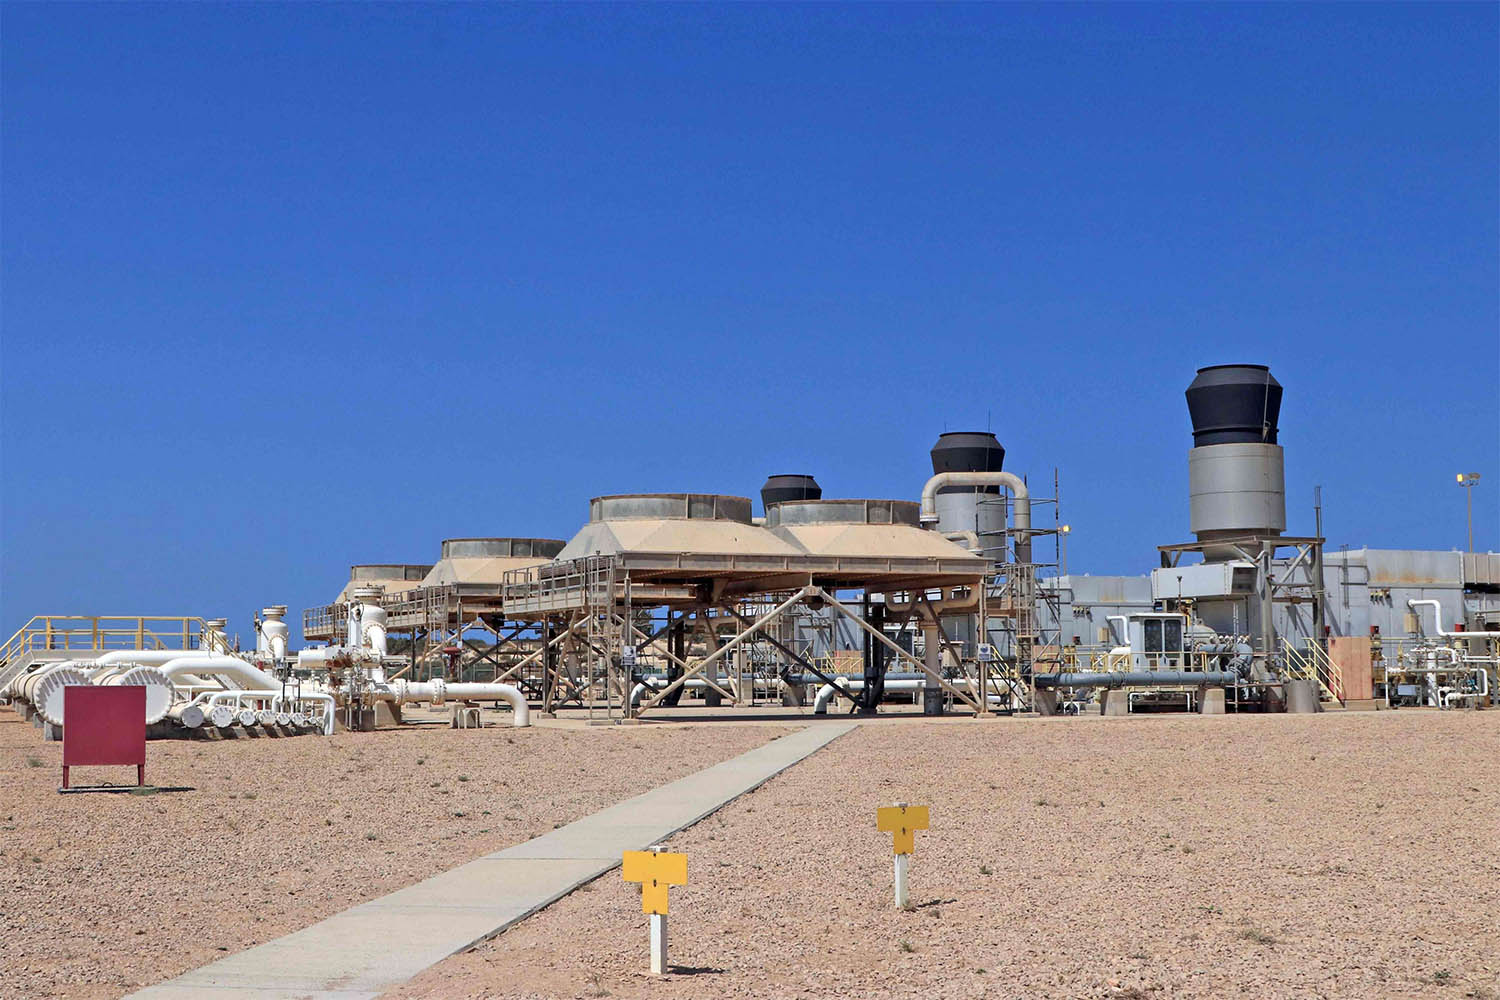 The closures of the two crude oil fields cost Libya more than $160 million per day in lost revenues